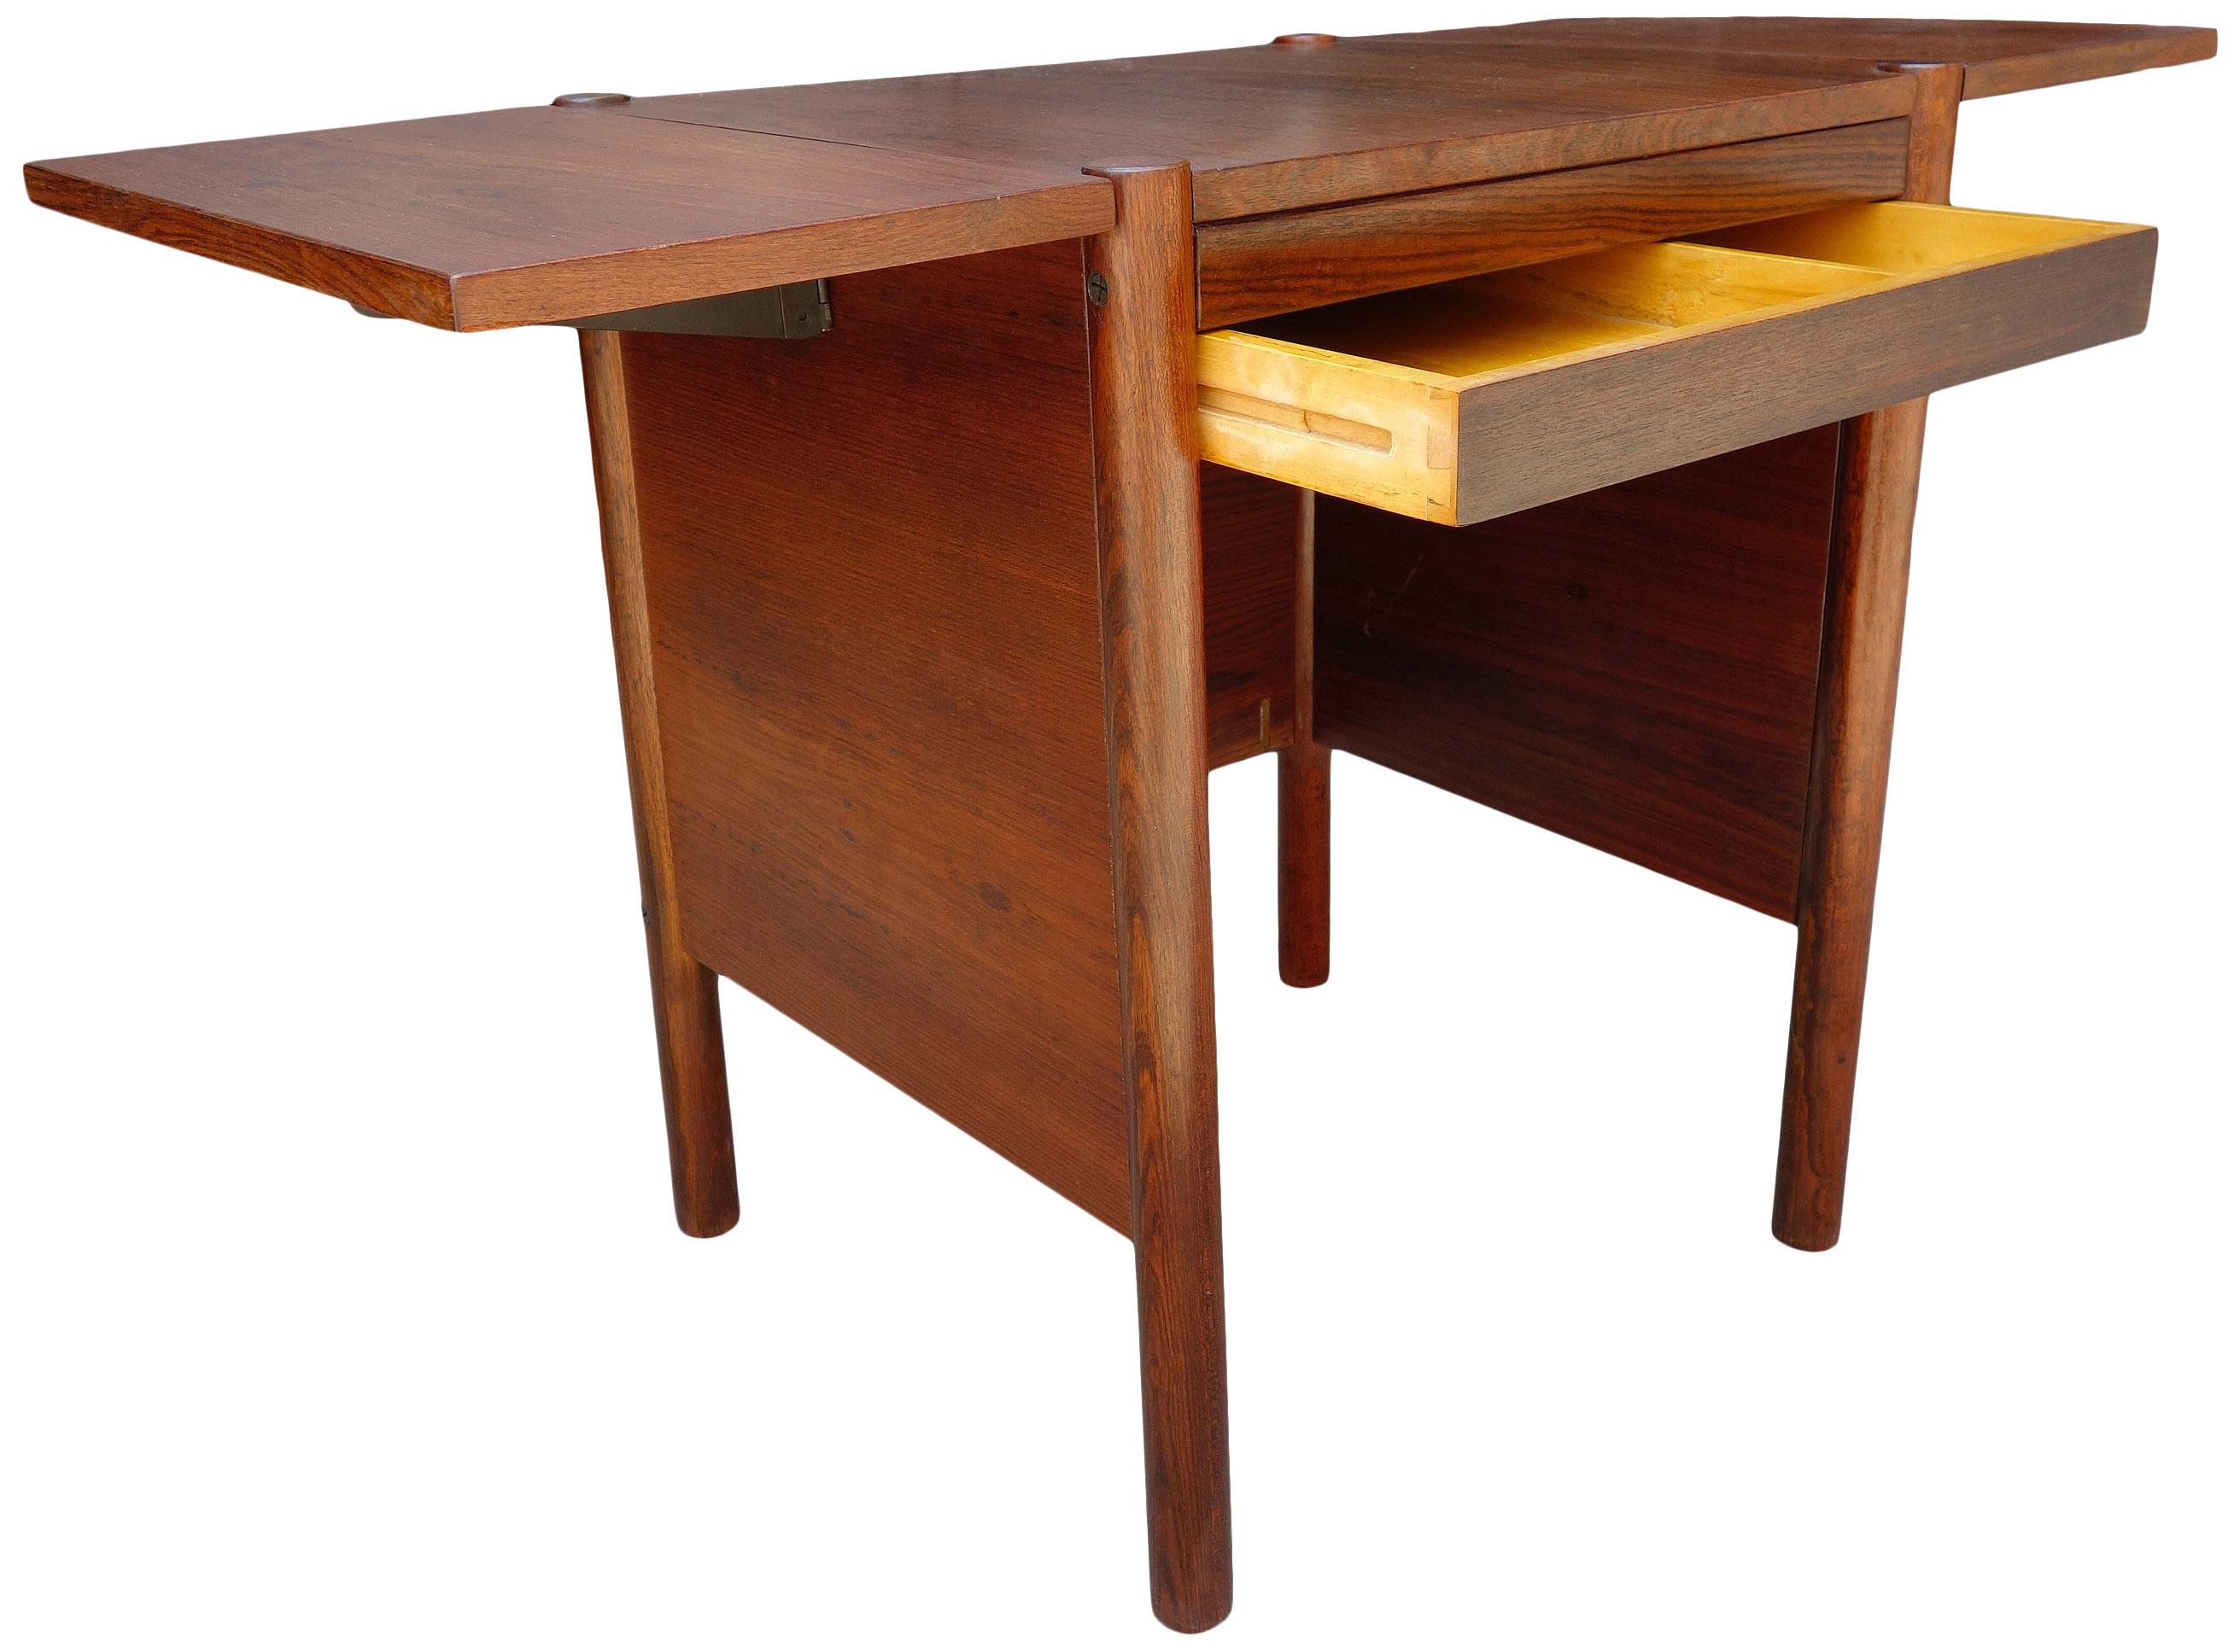 20th Century Midcentury Brazilian Drop-Leaf Table by Jean Gillon